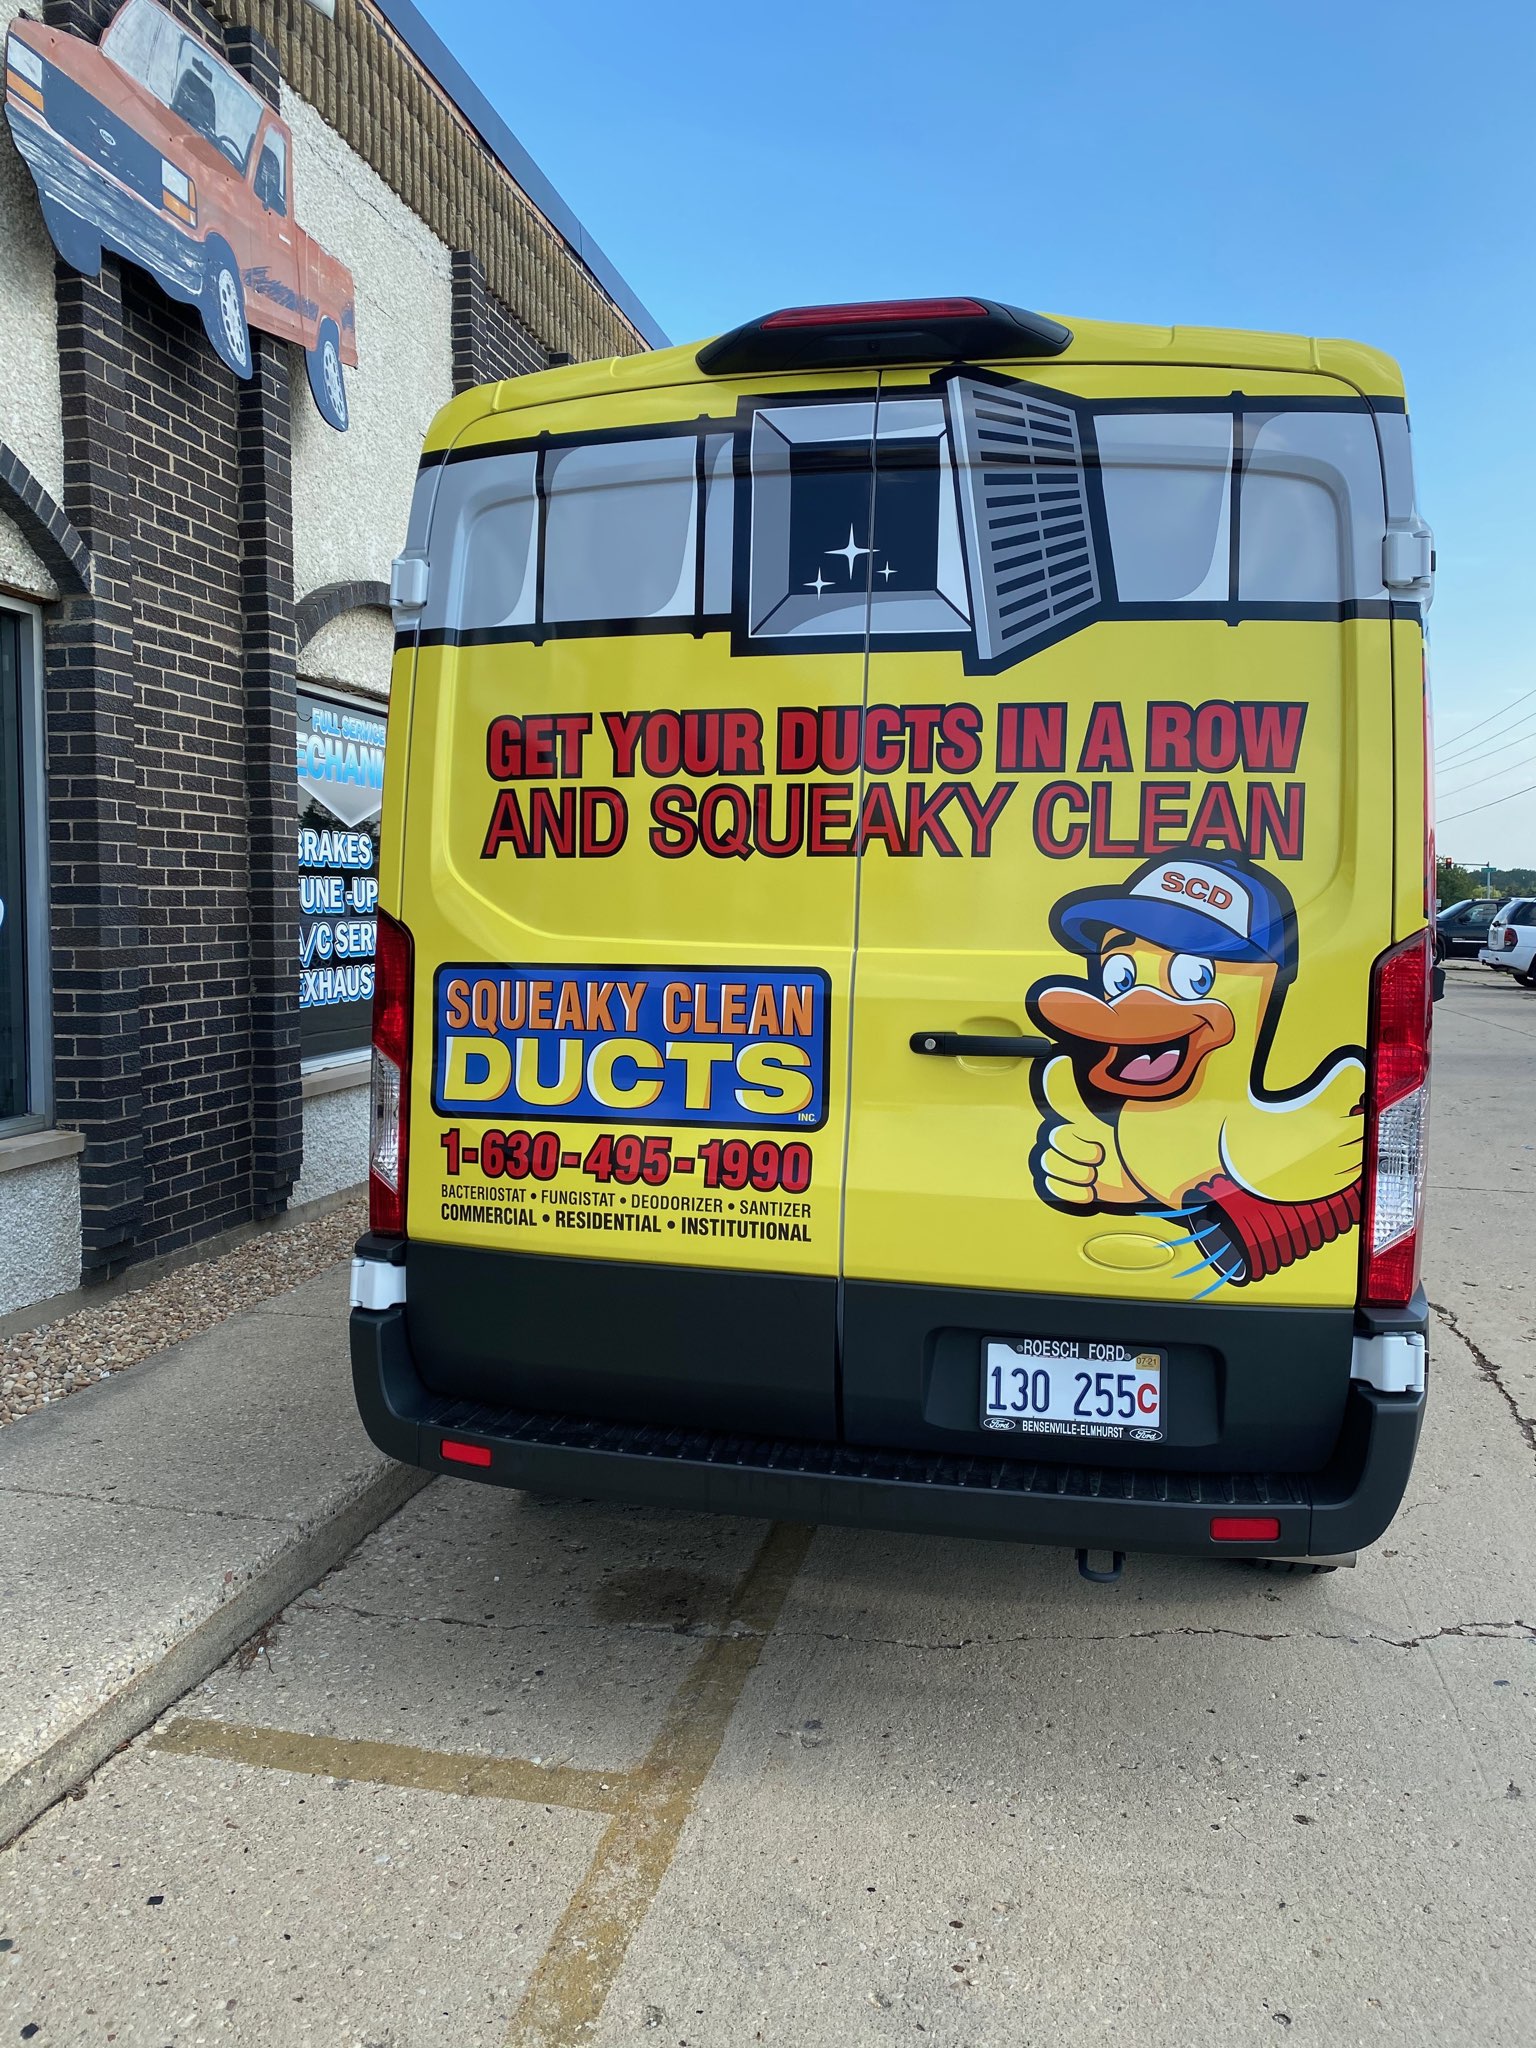 Squeaky Clean Ducts truck